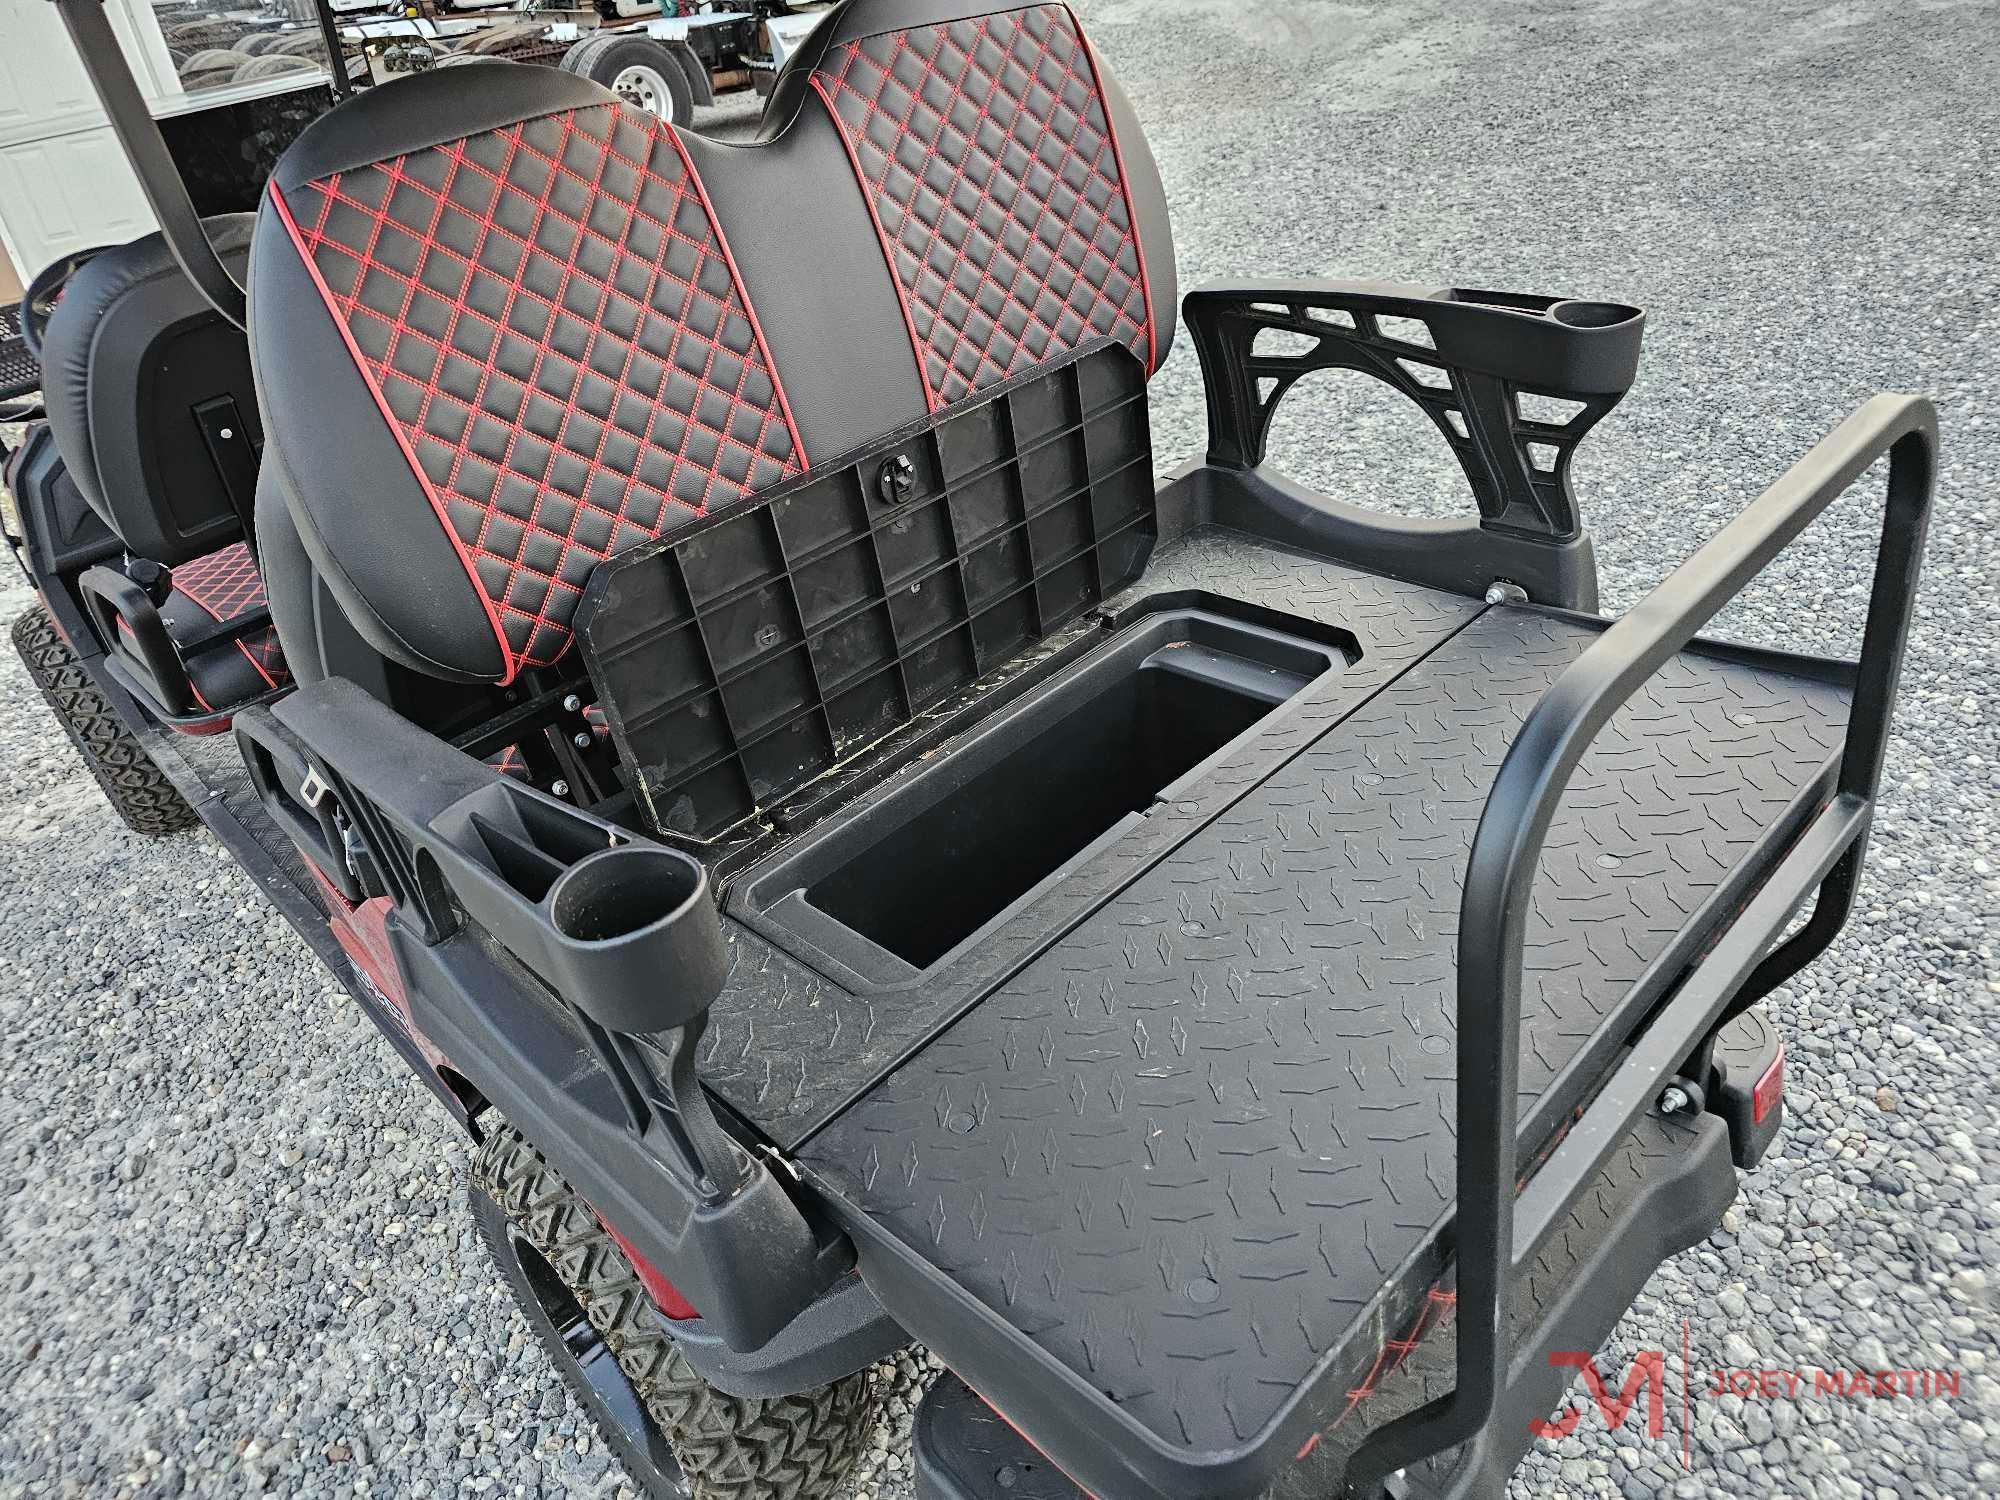 NEW 6-SEATER 48V ELECTRIC GOLF CART